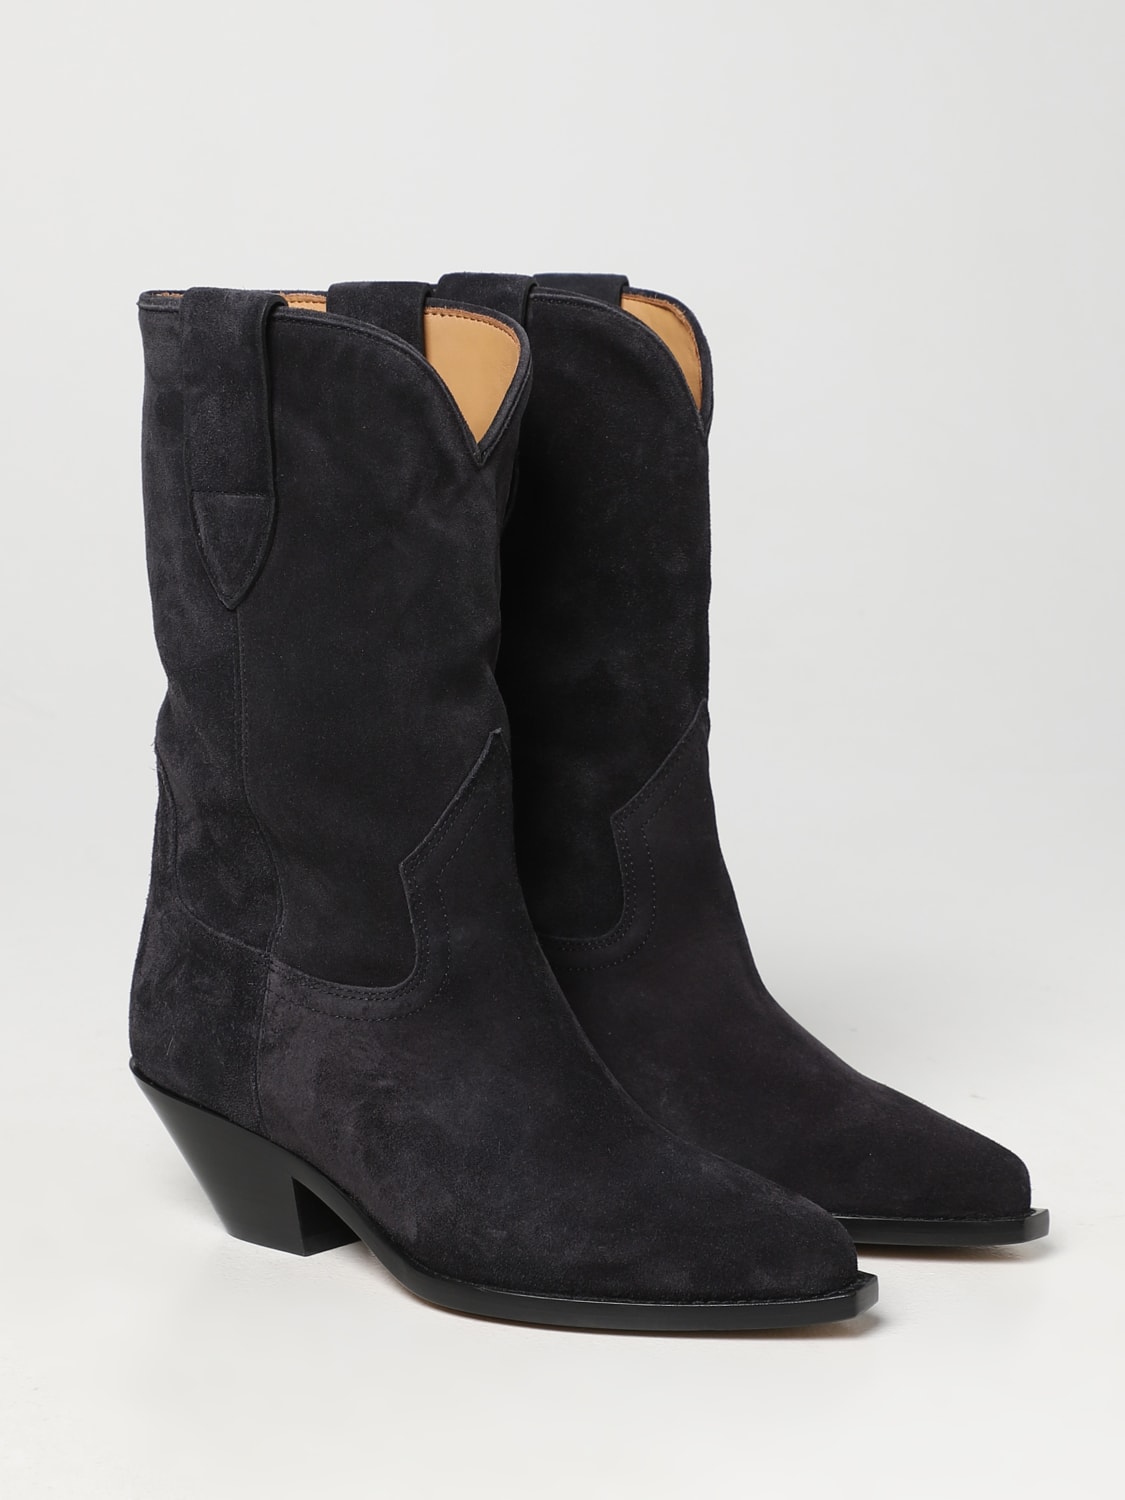 ISABEL MARANT: flat ankle boots for woman - Black | Isabel Marant flat ankle boots online on GIGLIO.COM